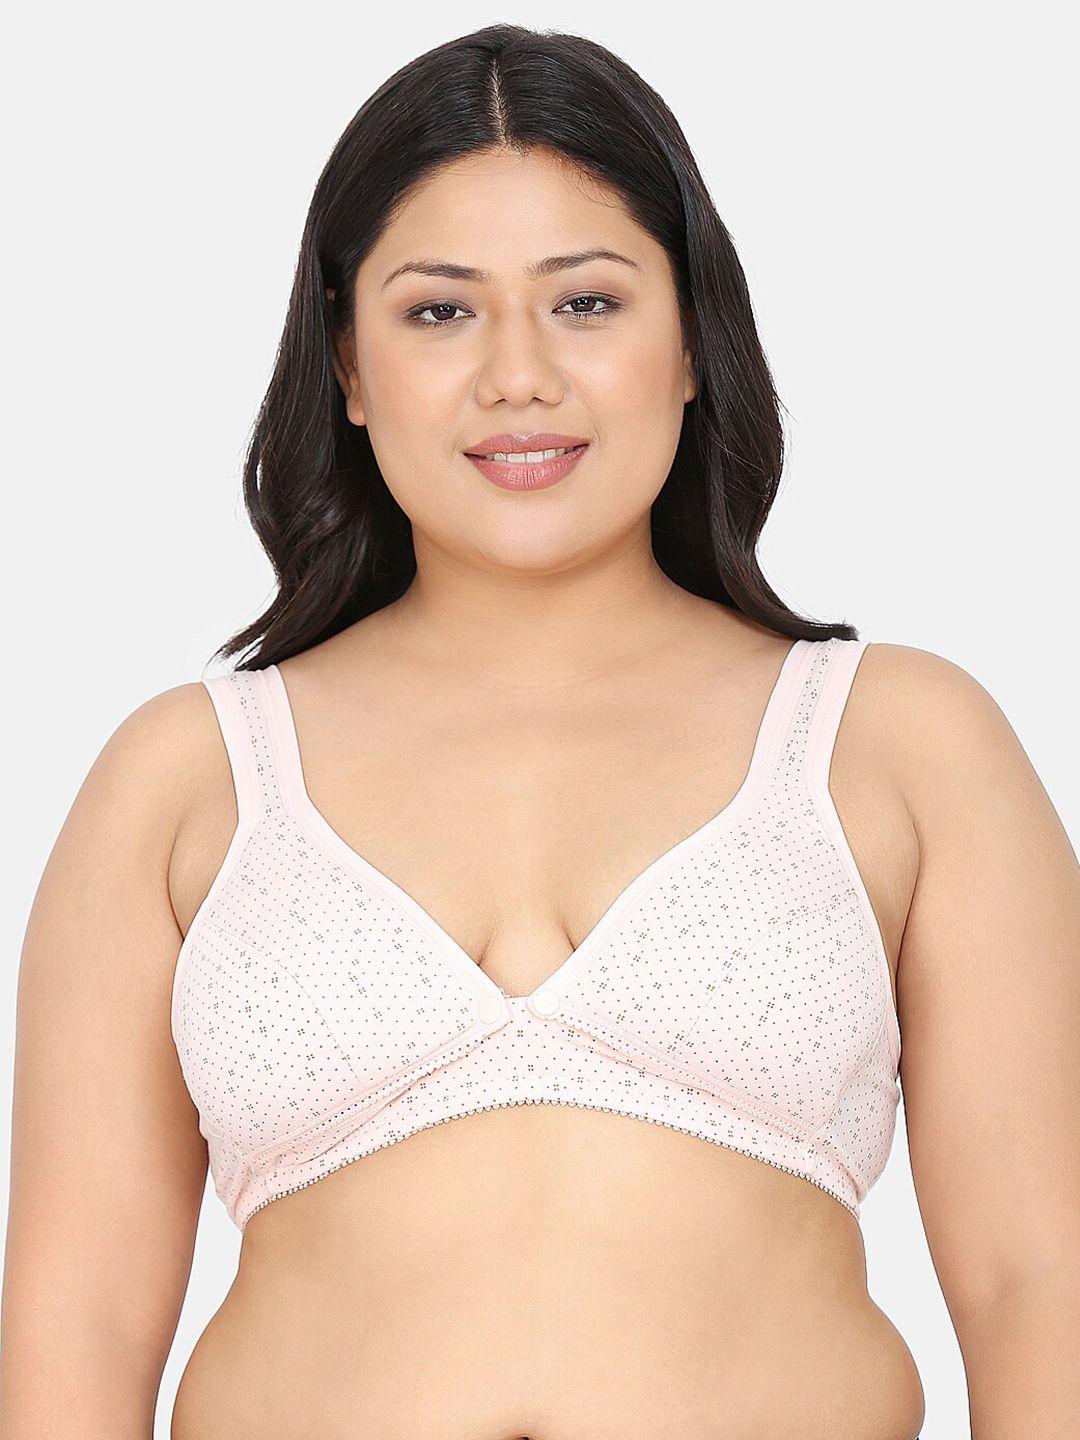 da intimo beige printed lightly padded anti microbial non-wired cotton maternity bra